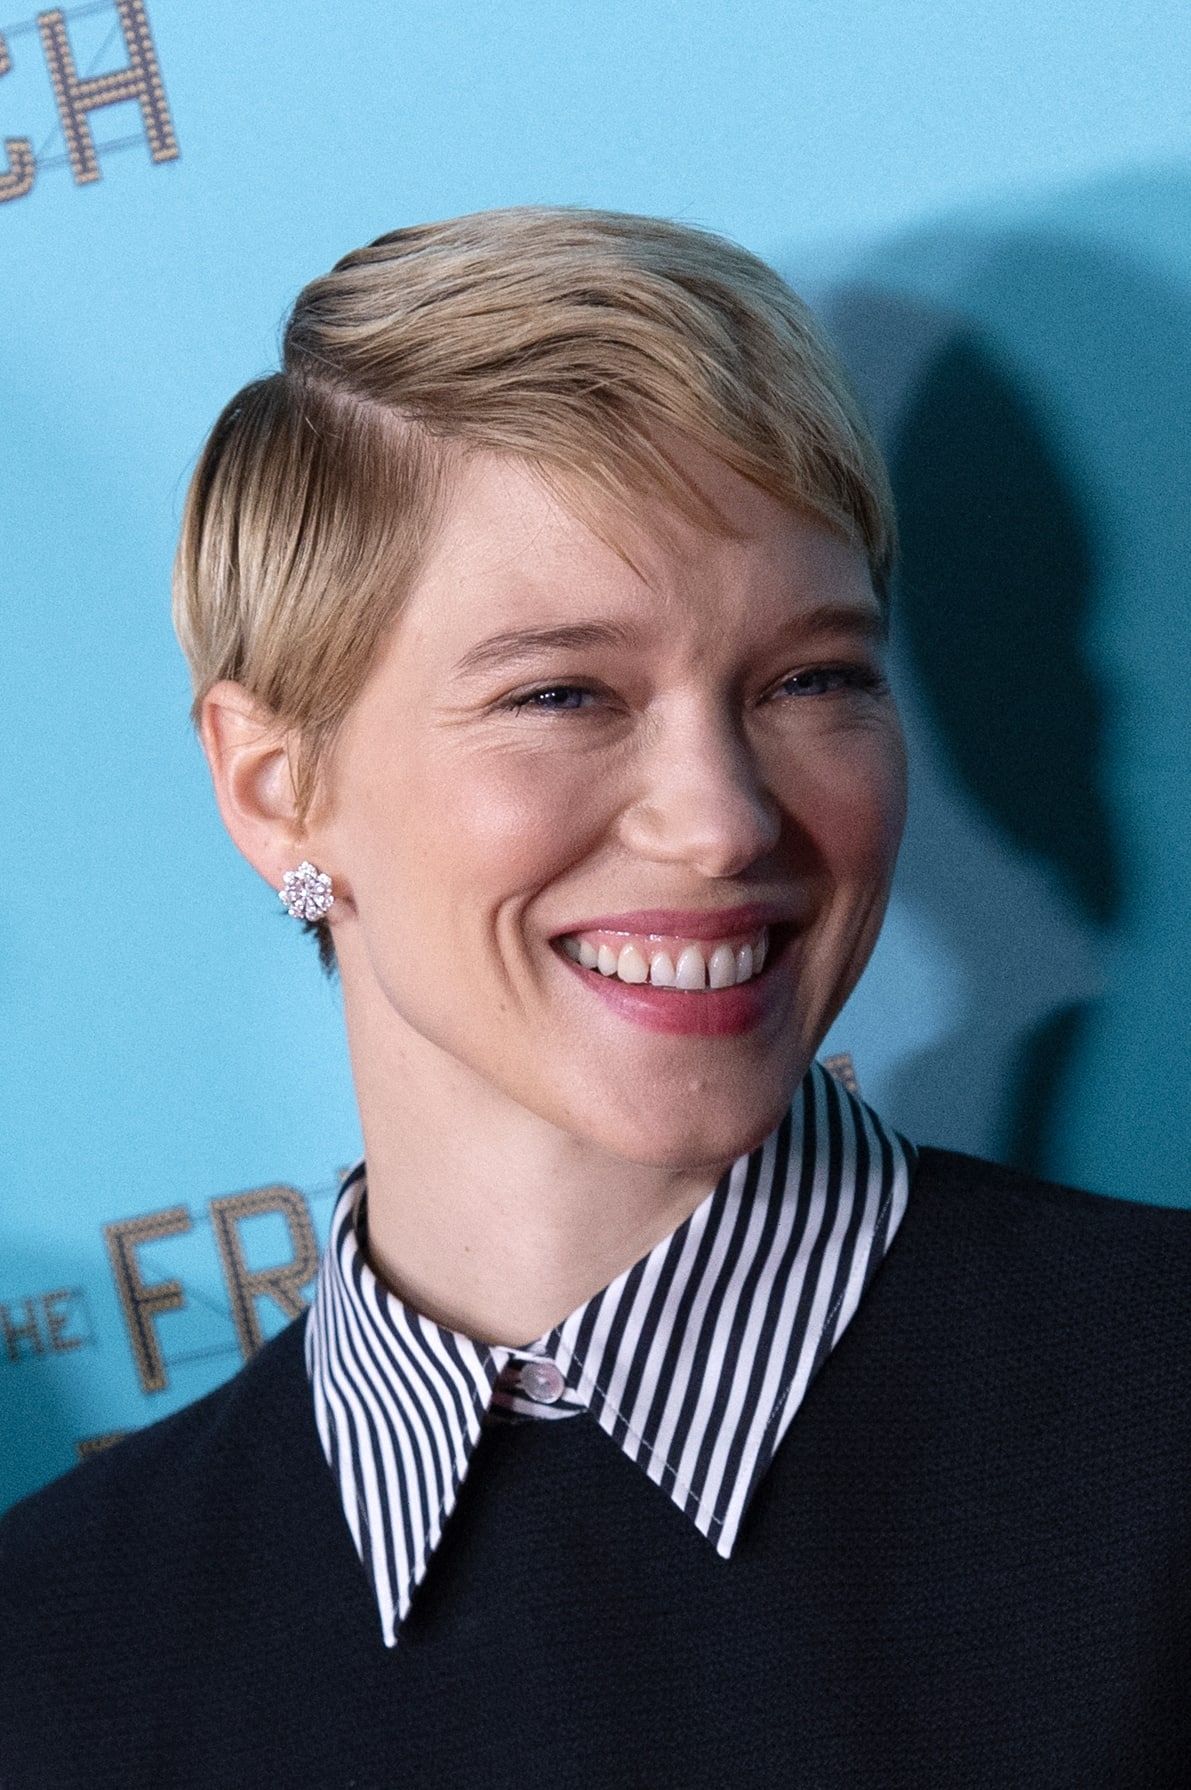 lea seydoux attends a screening of 'the french dispatch' during the 59th  new york film festival in new york city-021021_2